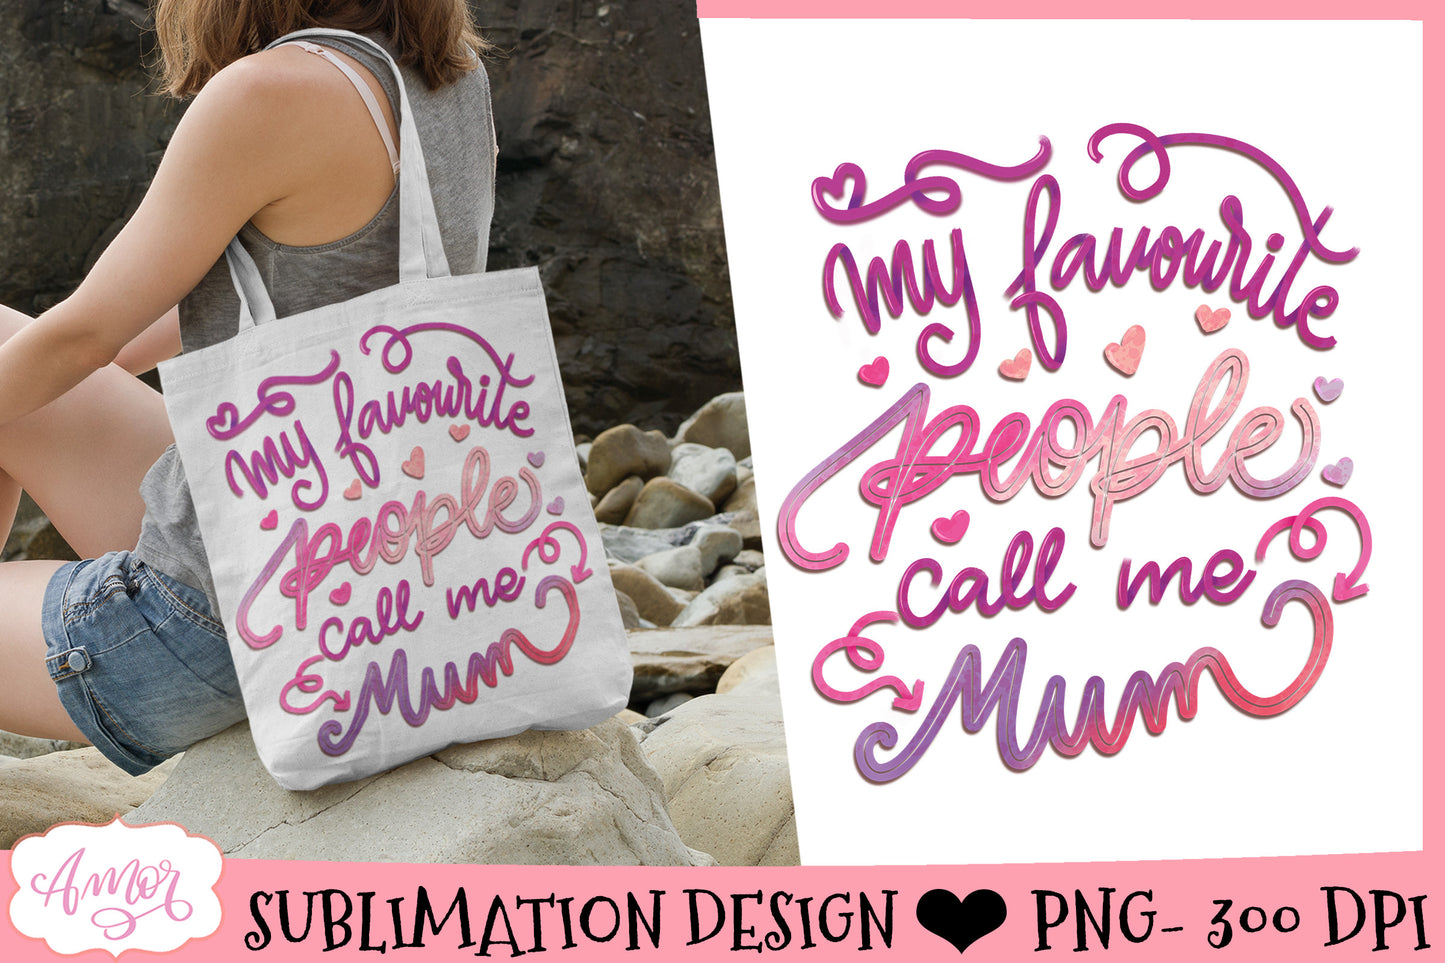 My favourite people call me mum Sublimation Design